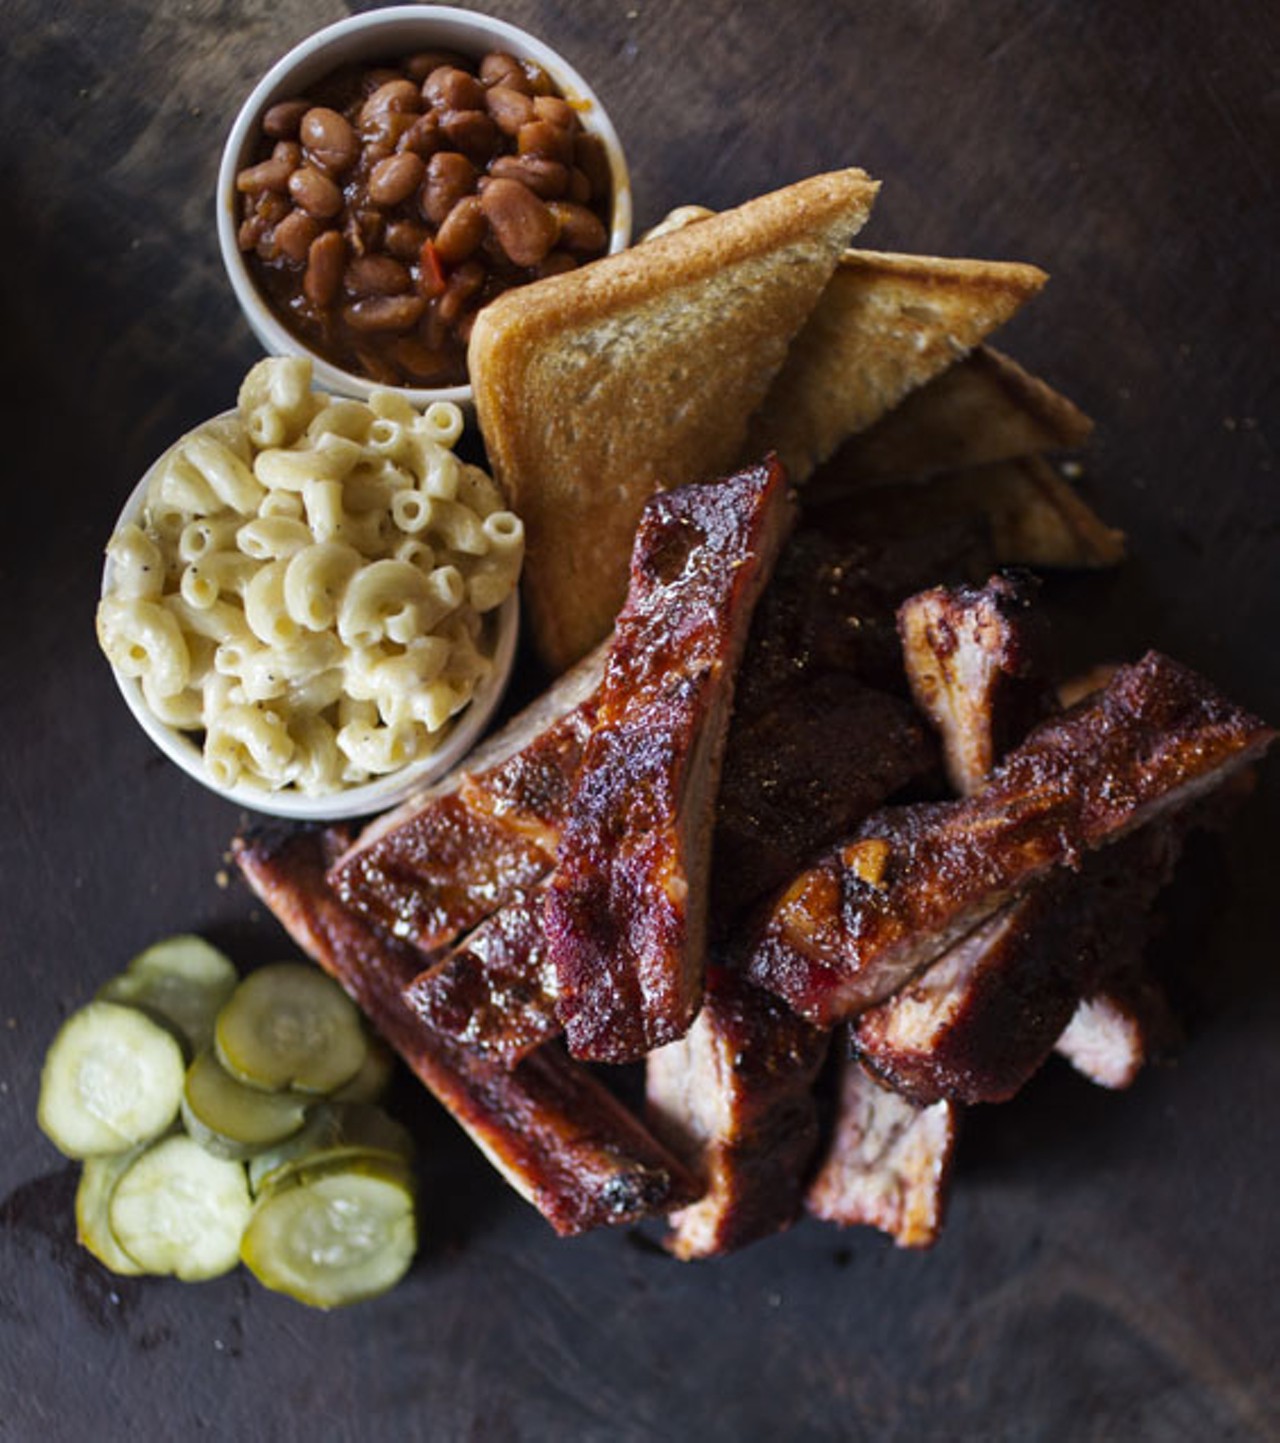 The smoked baby-back ribs are dry rubbed. Here, they're shown with the five-cheese mac & cheese and root-beer-baked beans.